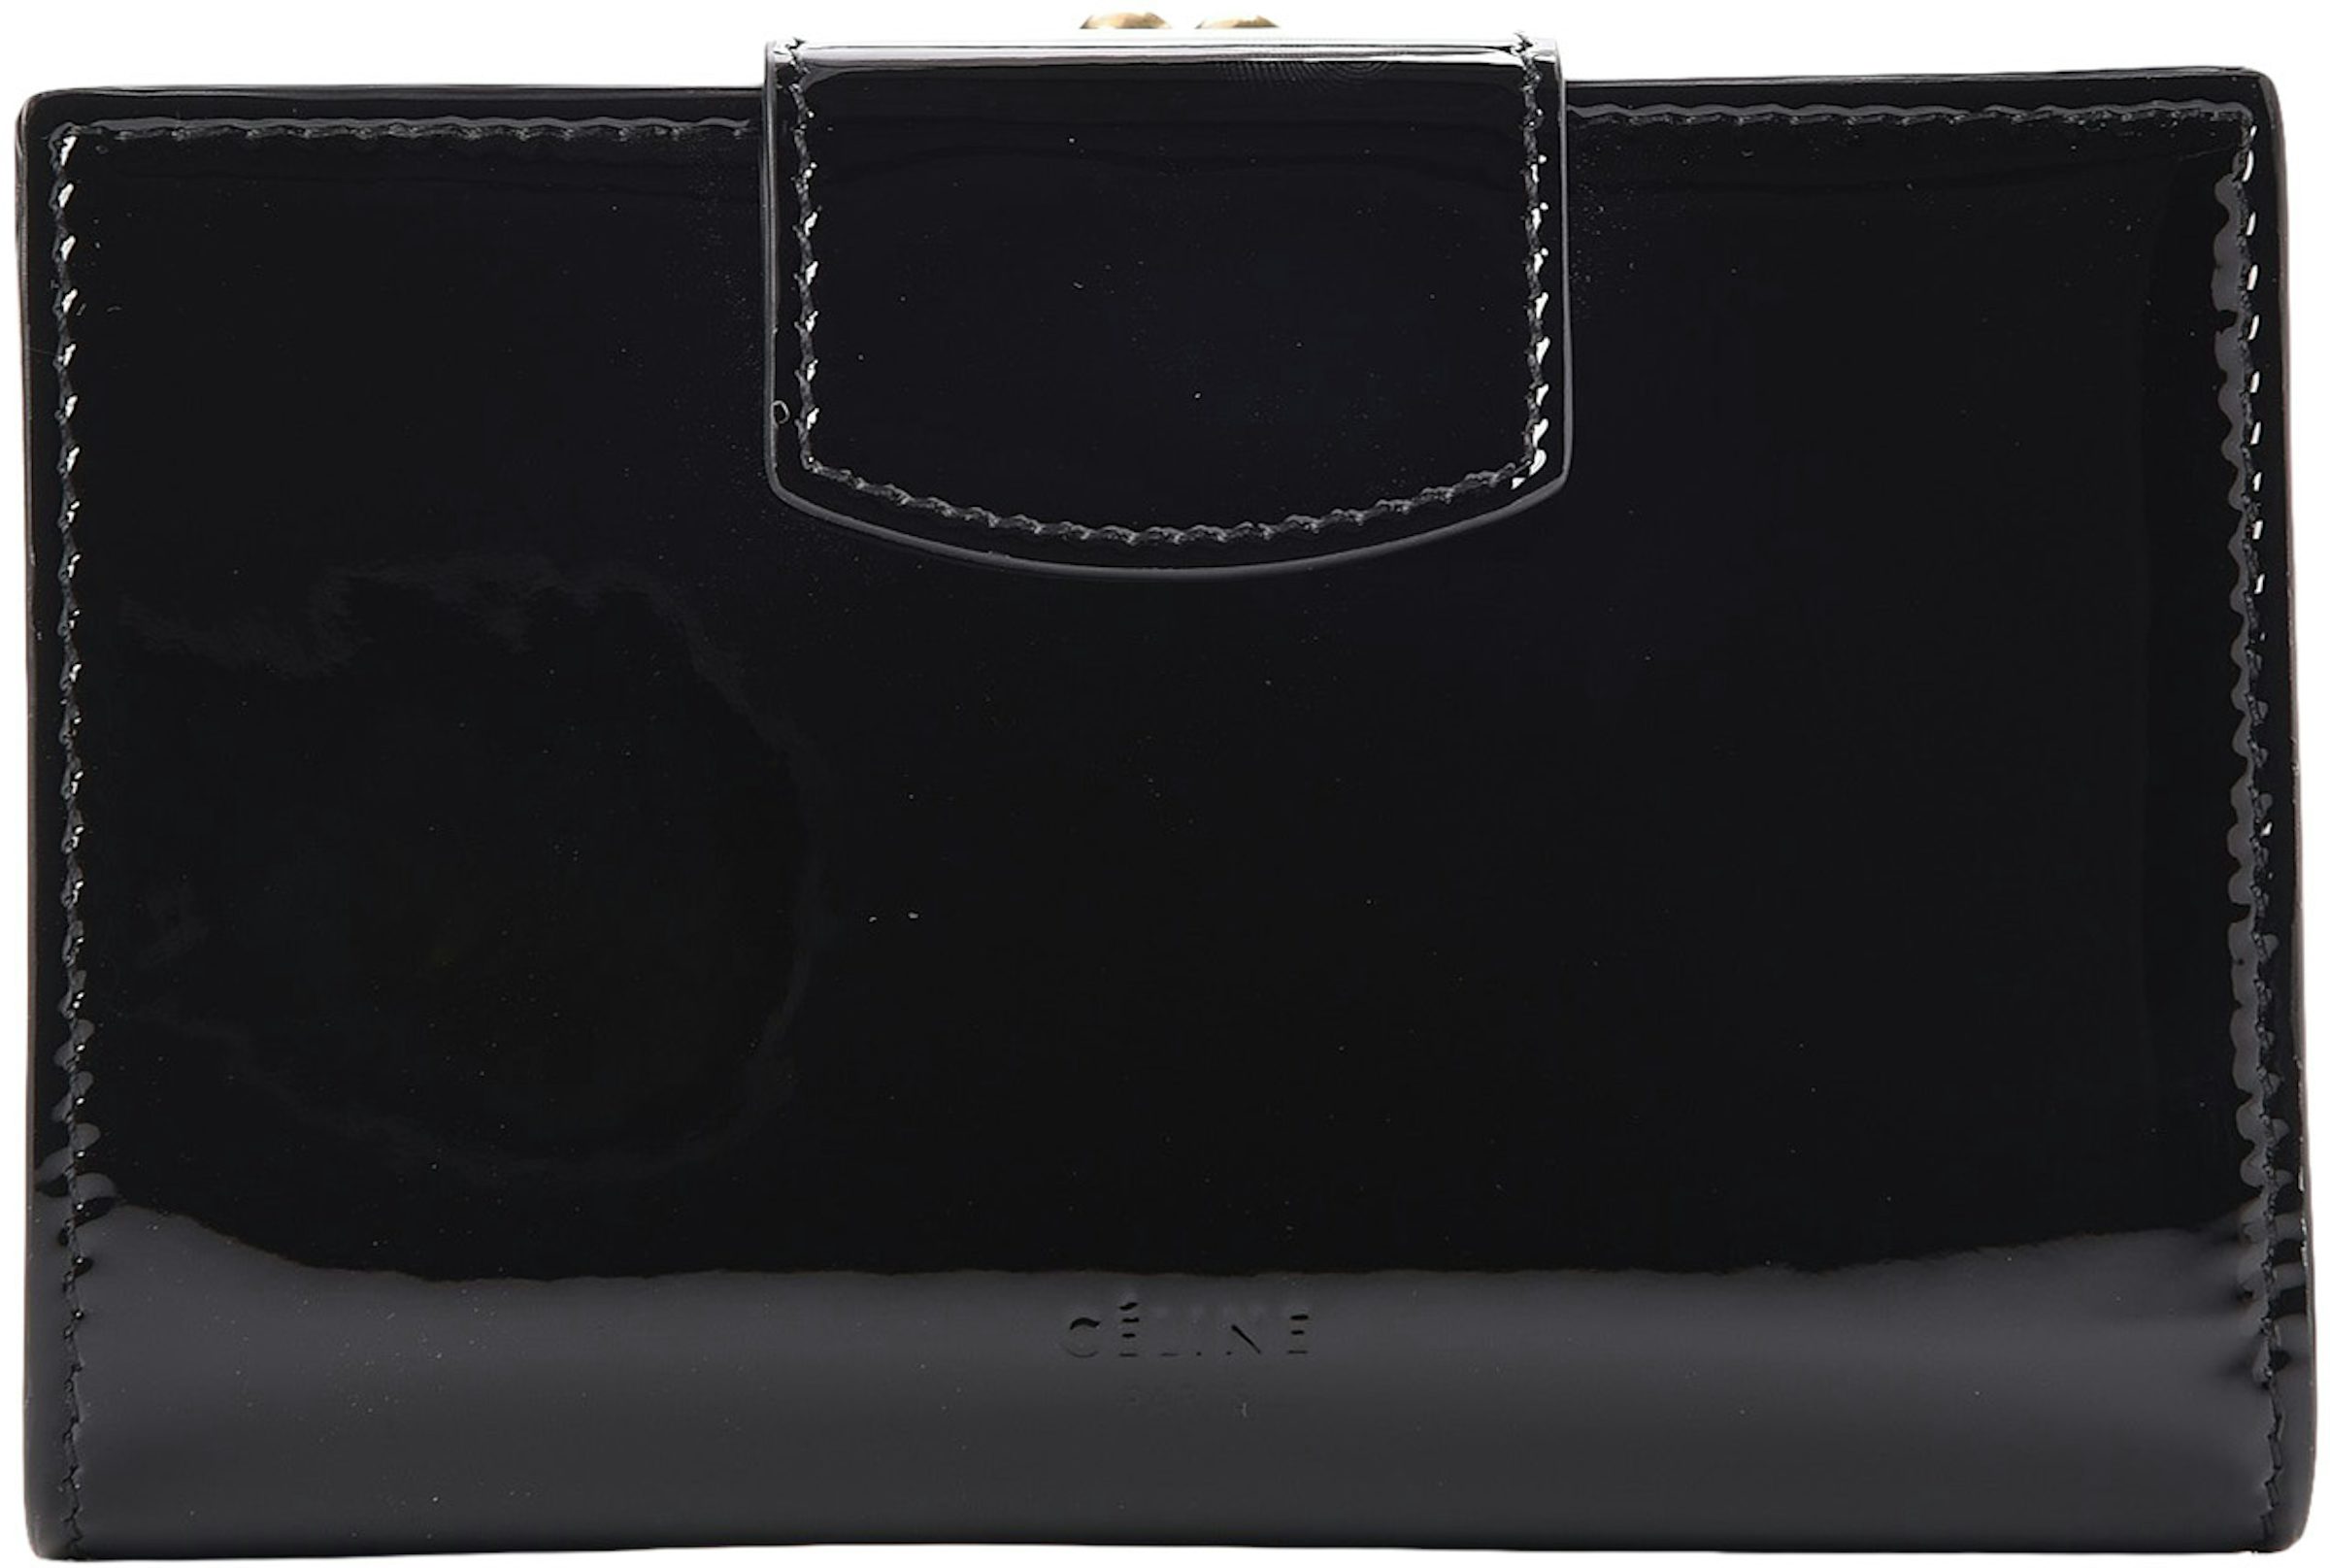 Black Patent Leather Wallet